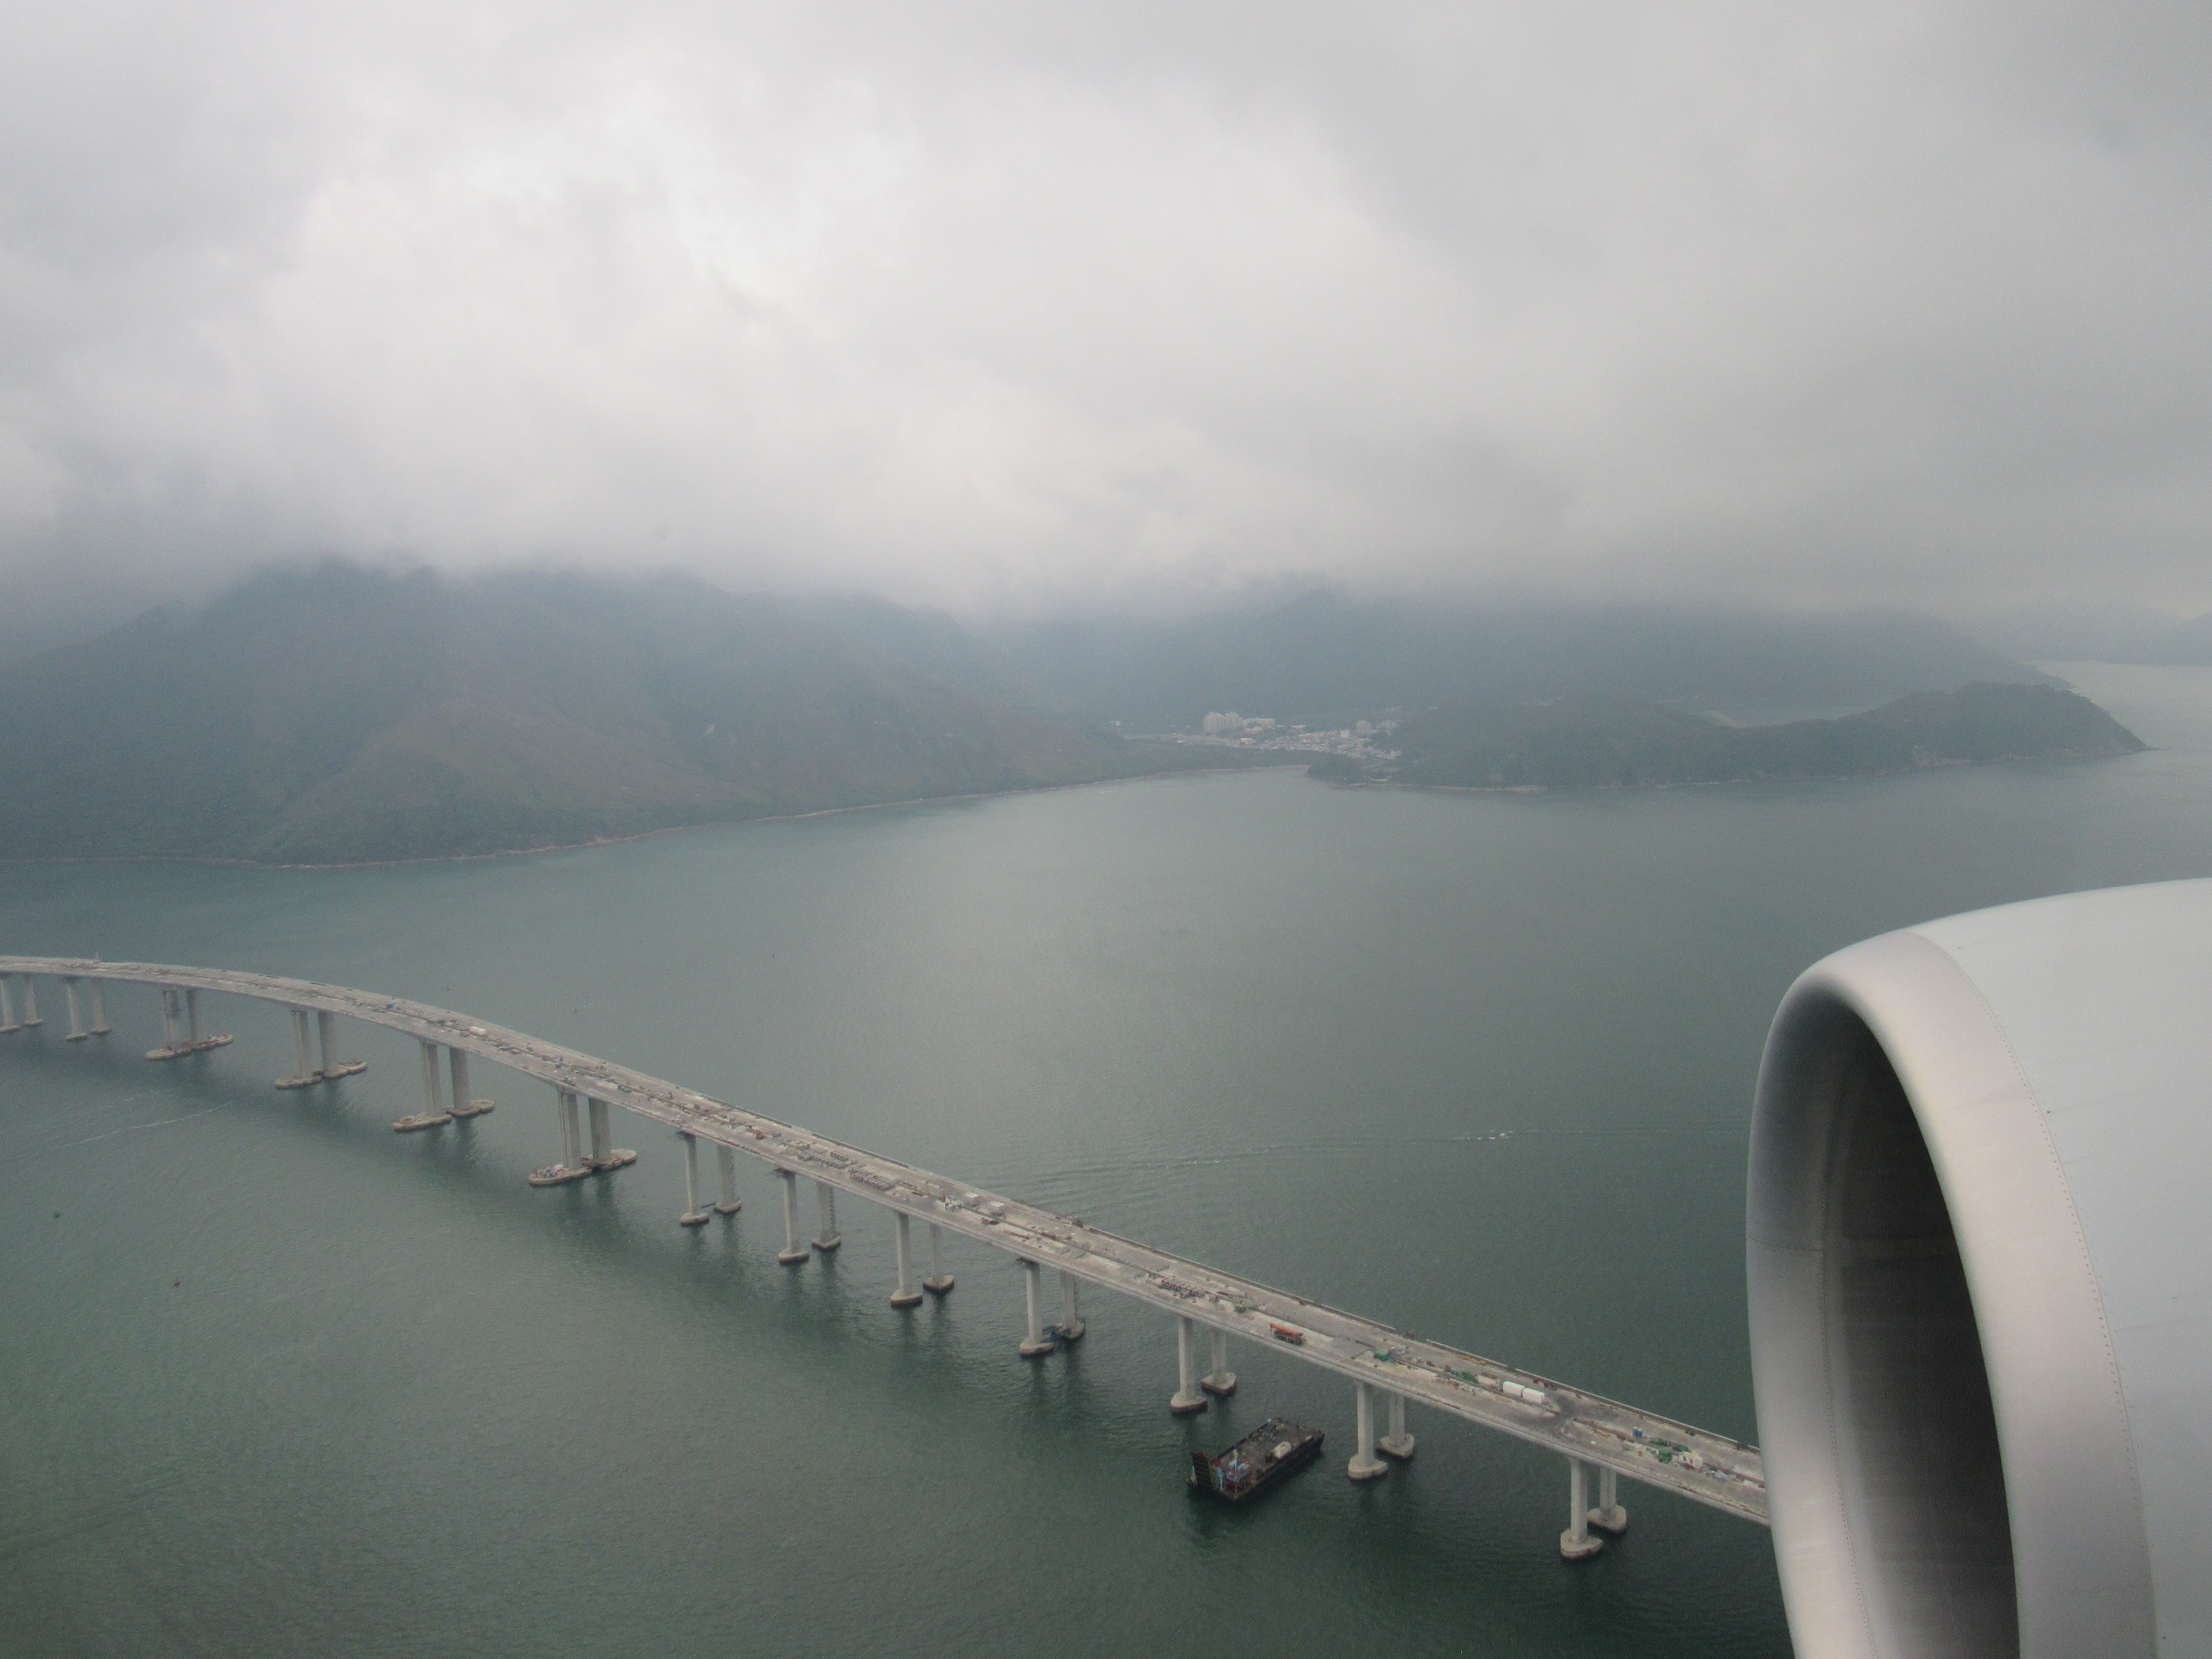 Arrival into HKG